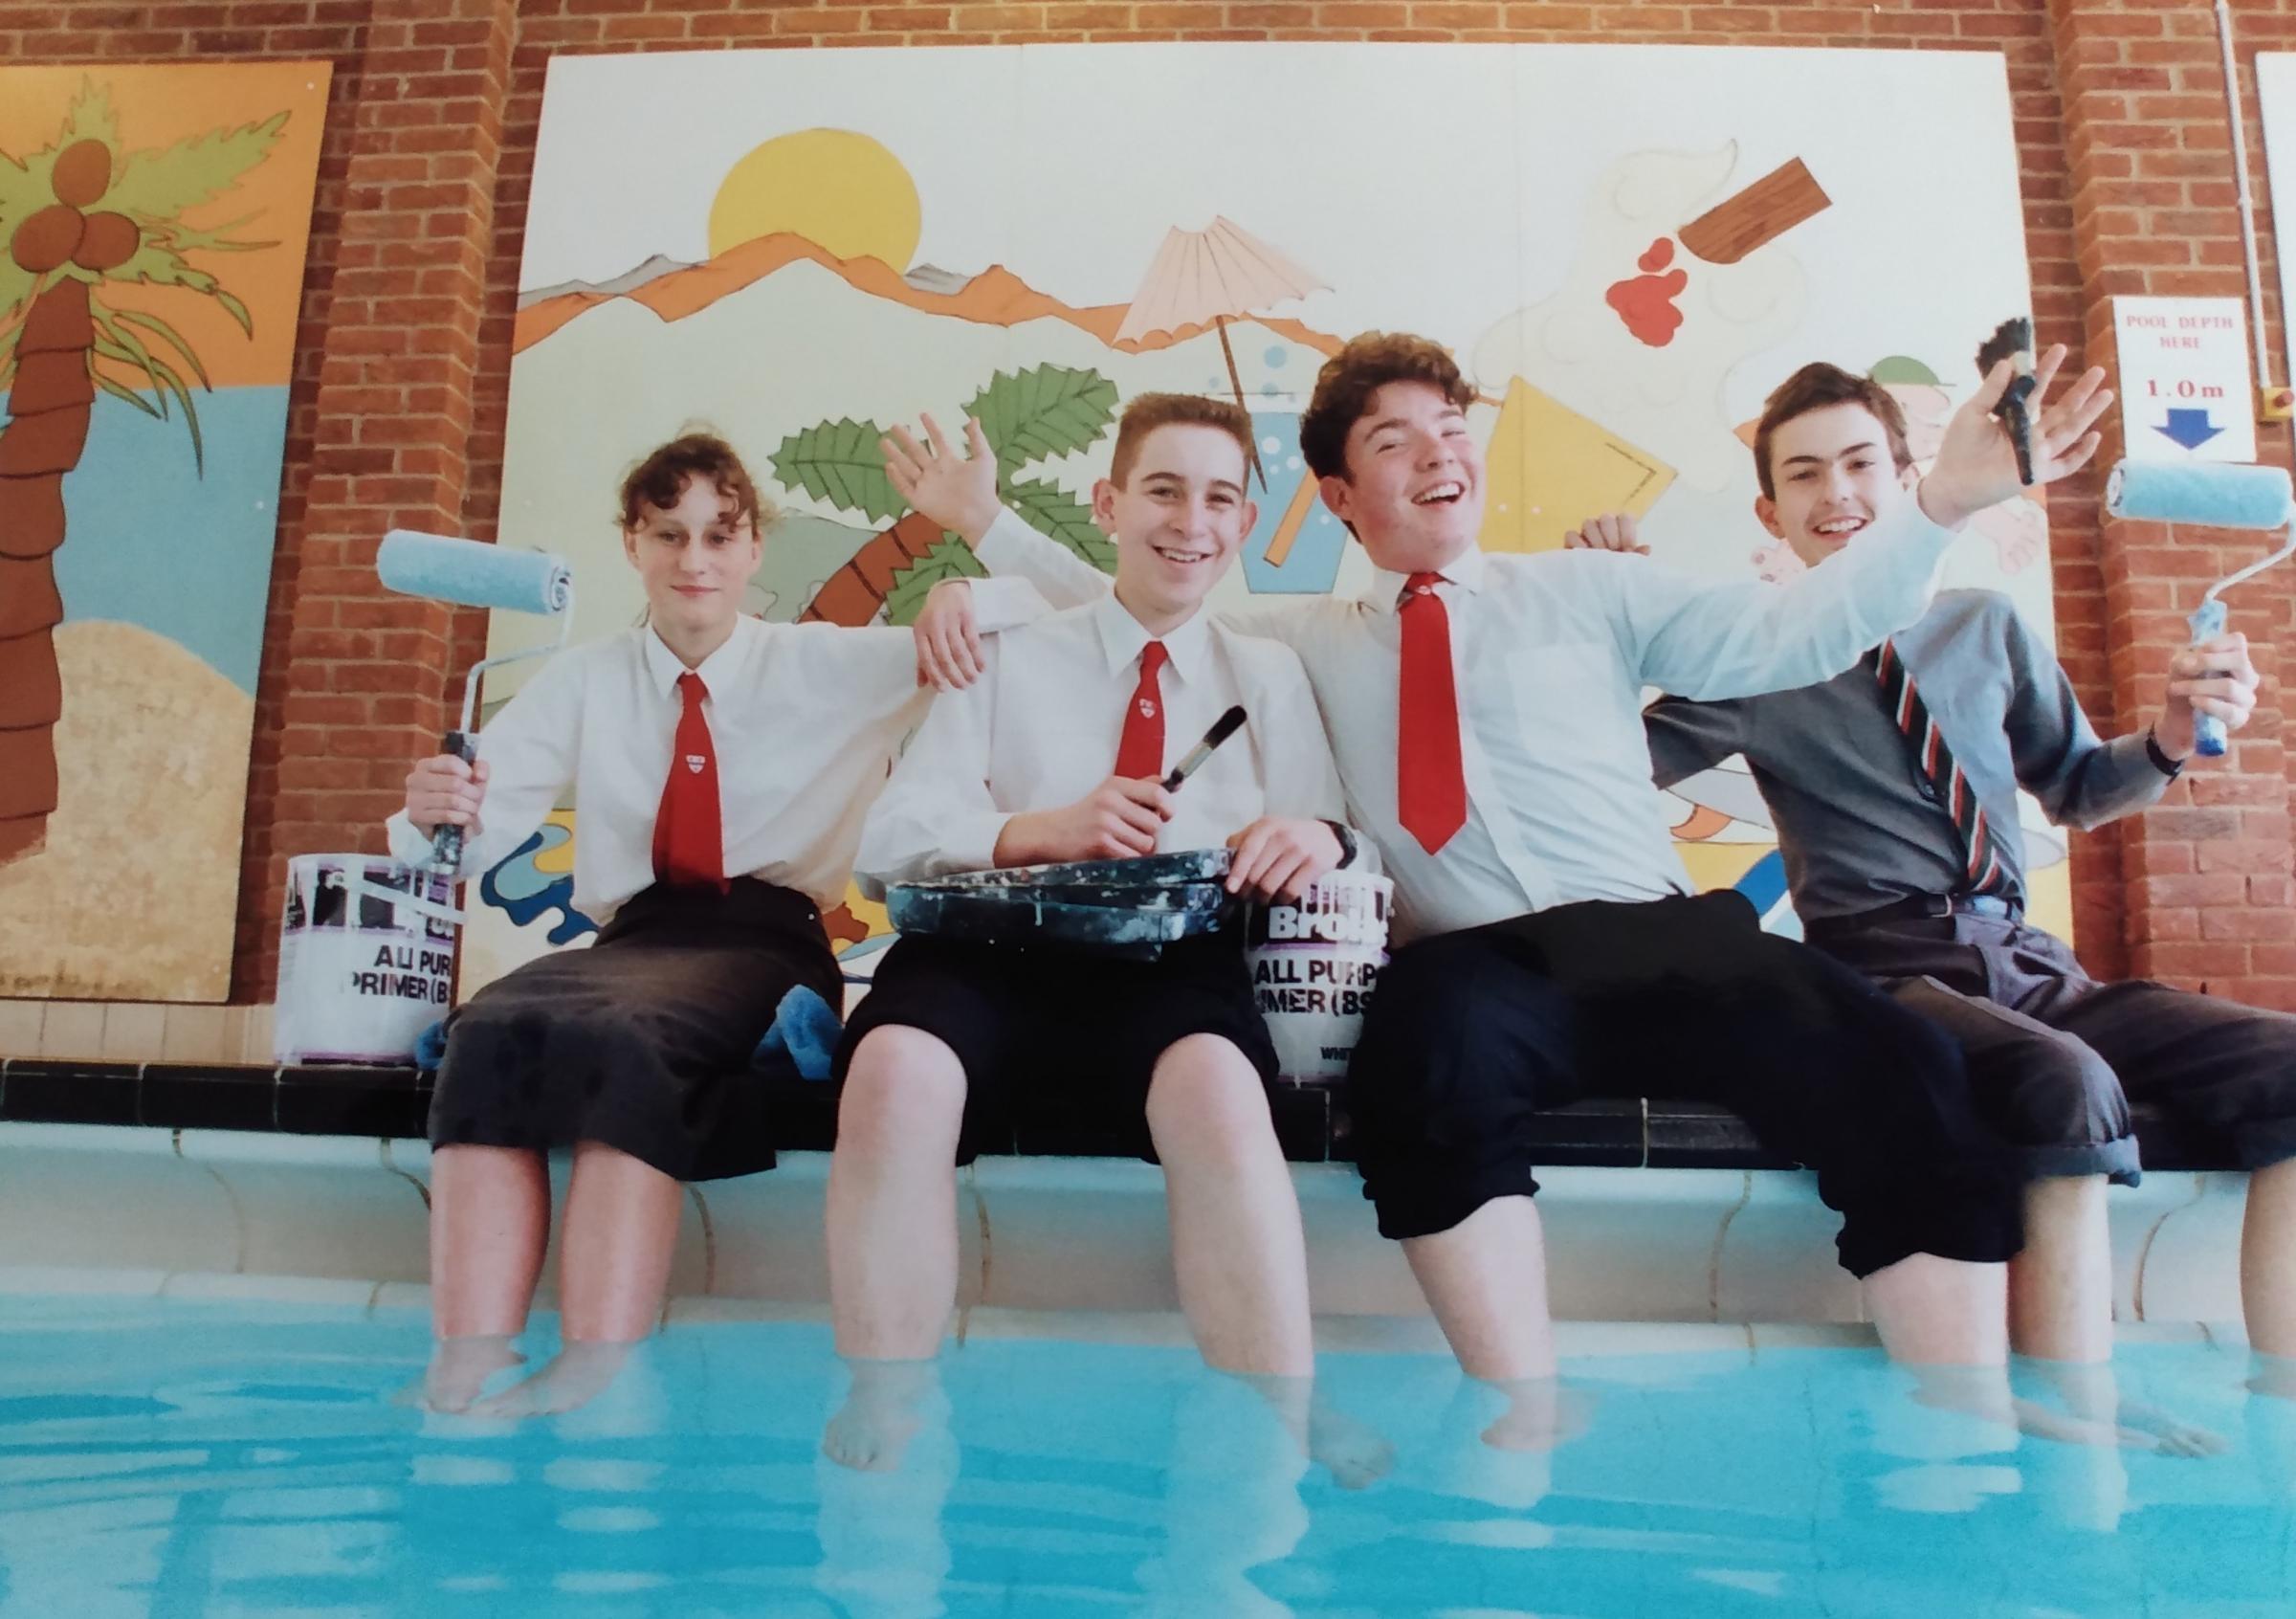 February 1993 and four Nunnery Wood pupils brightened up the walls at Worcester Swimming Pool in Sansome Walk. From left, Nicola Sprague, Adam Kenney, Barry Harker and Richard Hencher